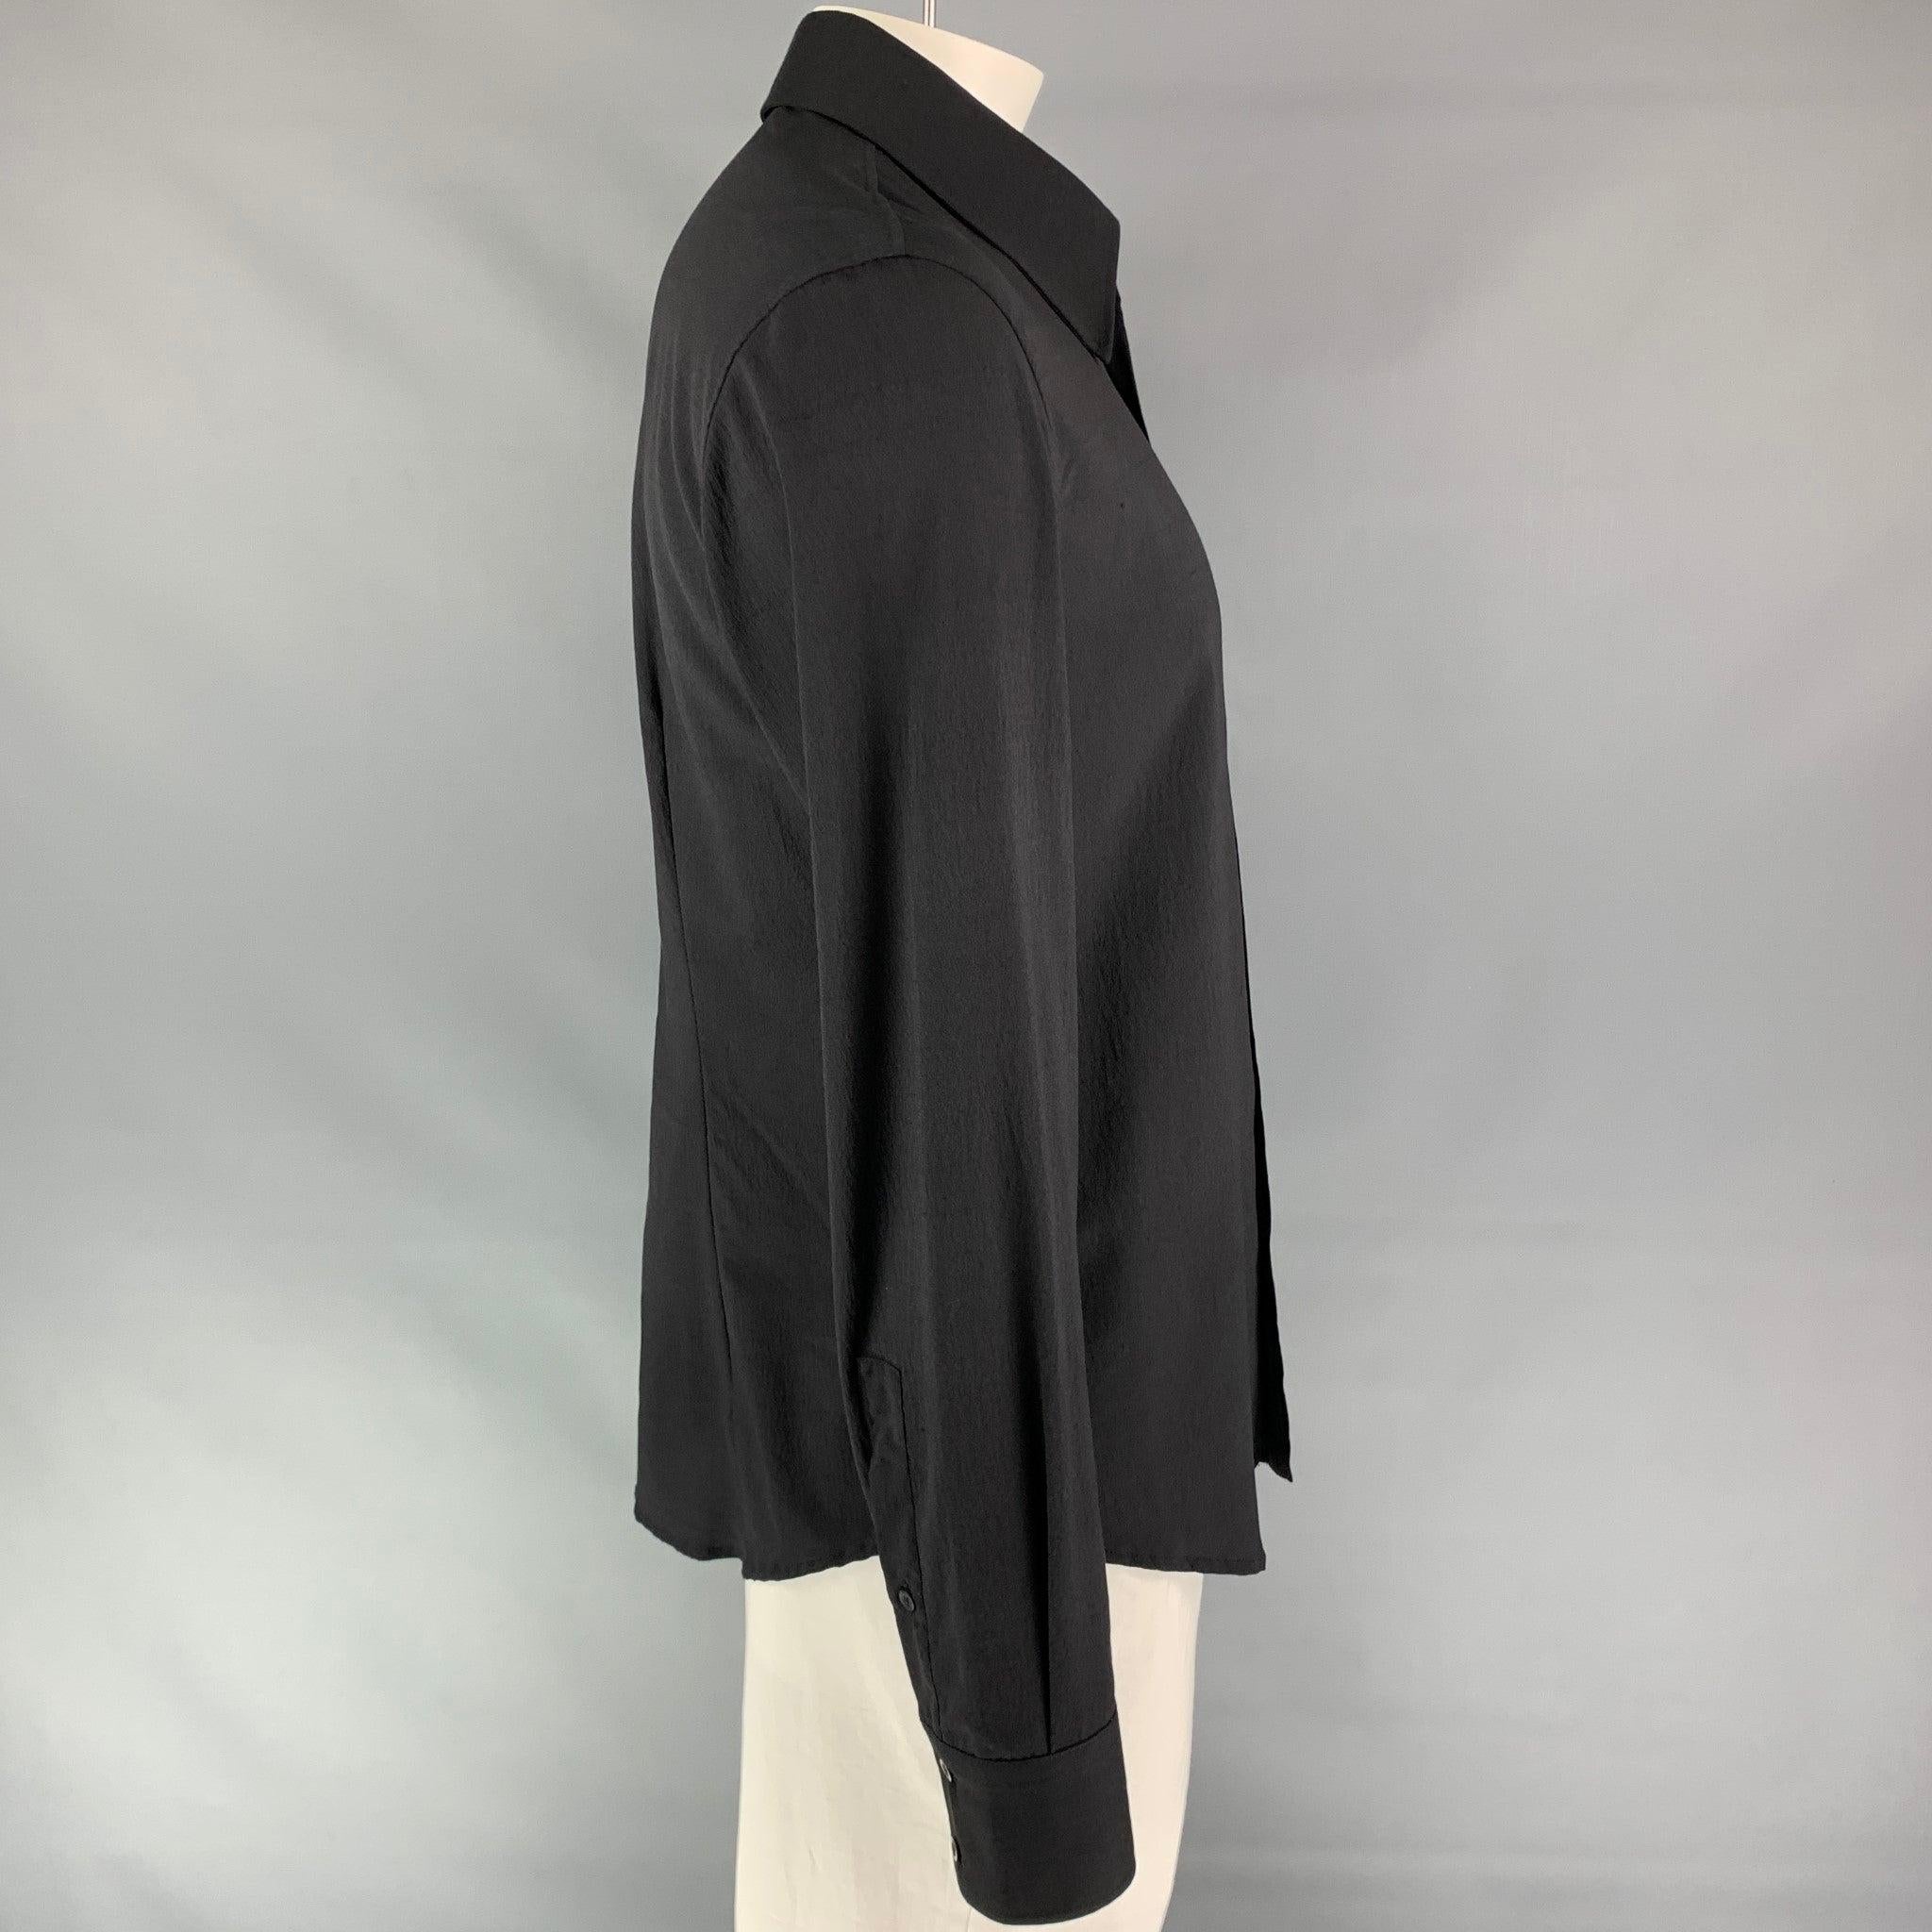 JUST CAVALLI long sleeve shirt comes in a black silk featuring a braided leather trim, spread up, and a button up closure. Made in Italy.Very Good
Pre-Owned Condition. 

Marked:   54 

Measurements: 
 
Shoulder: 20 inches  Chest: 44 inches  Sleeve: